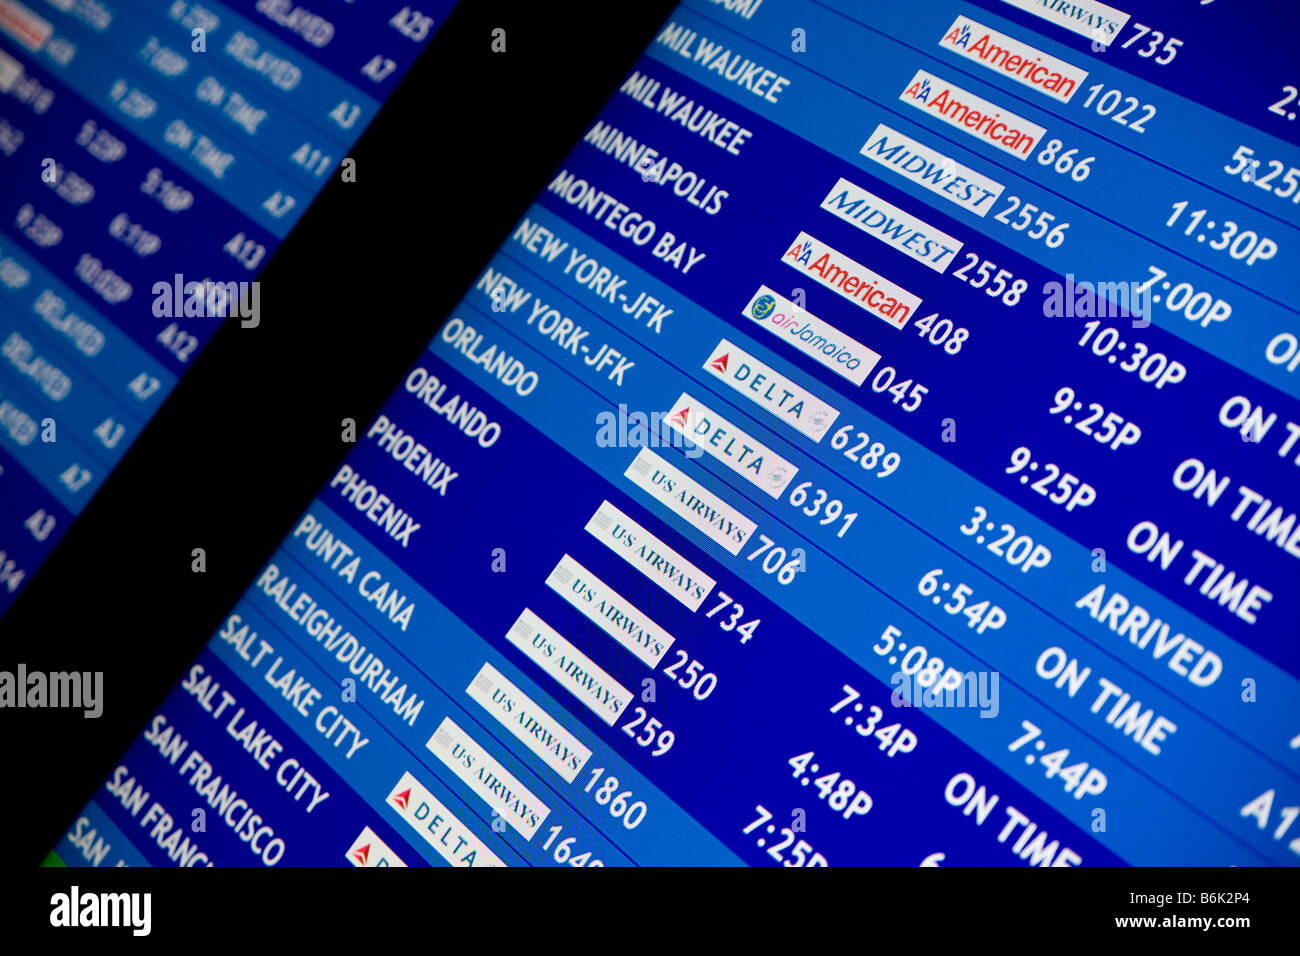 Airline flight schedule board at an airport showing delays and flight cancellations Stock Photo